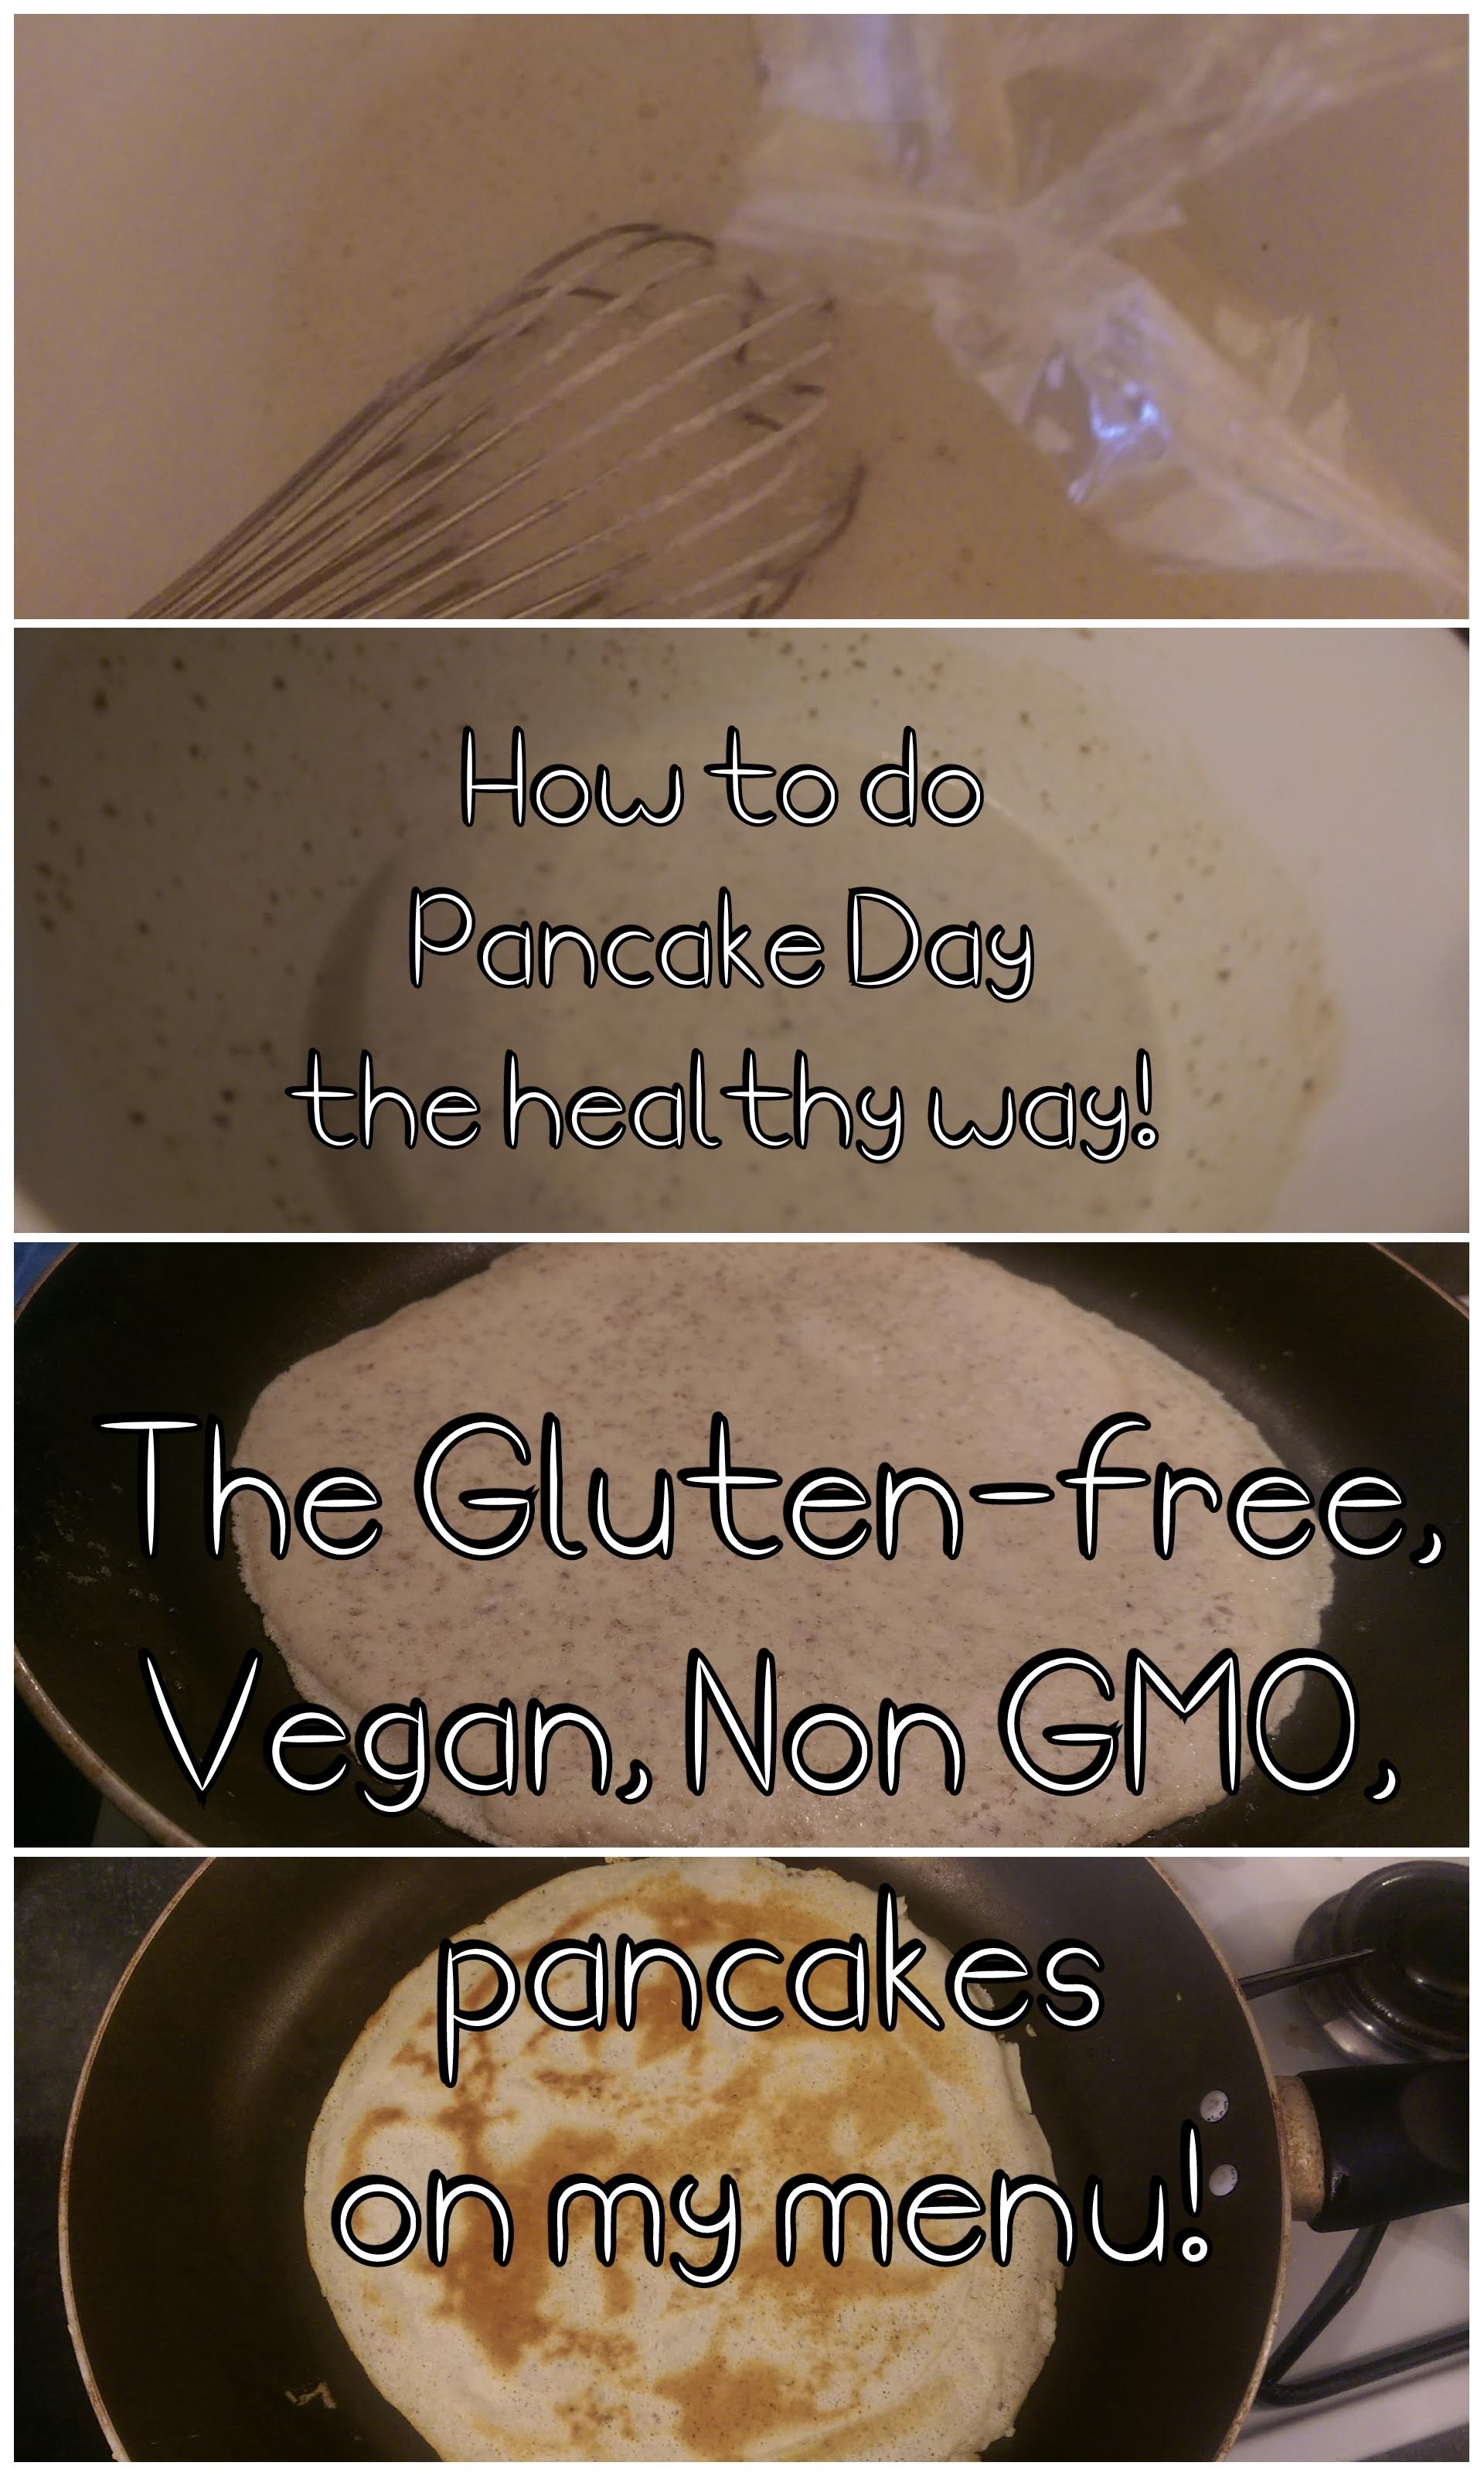 How to do pancake day the healthy way! The Gluten-free, Vegan and Non GMO pancakes on my menu! By Helen's Journey Blog